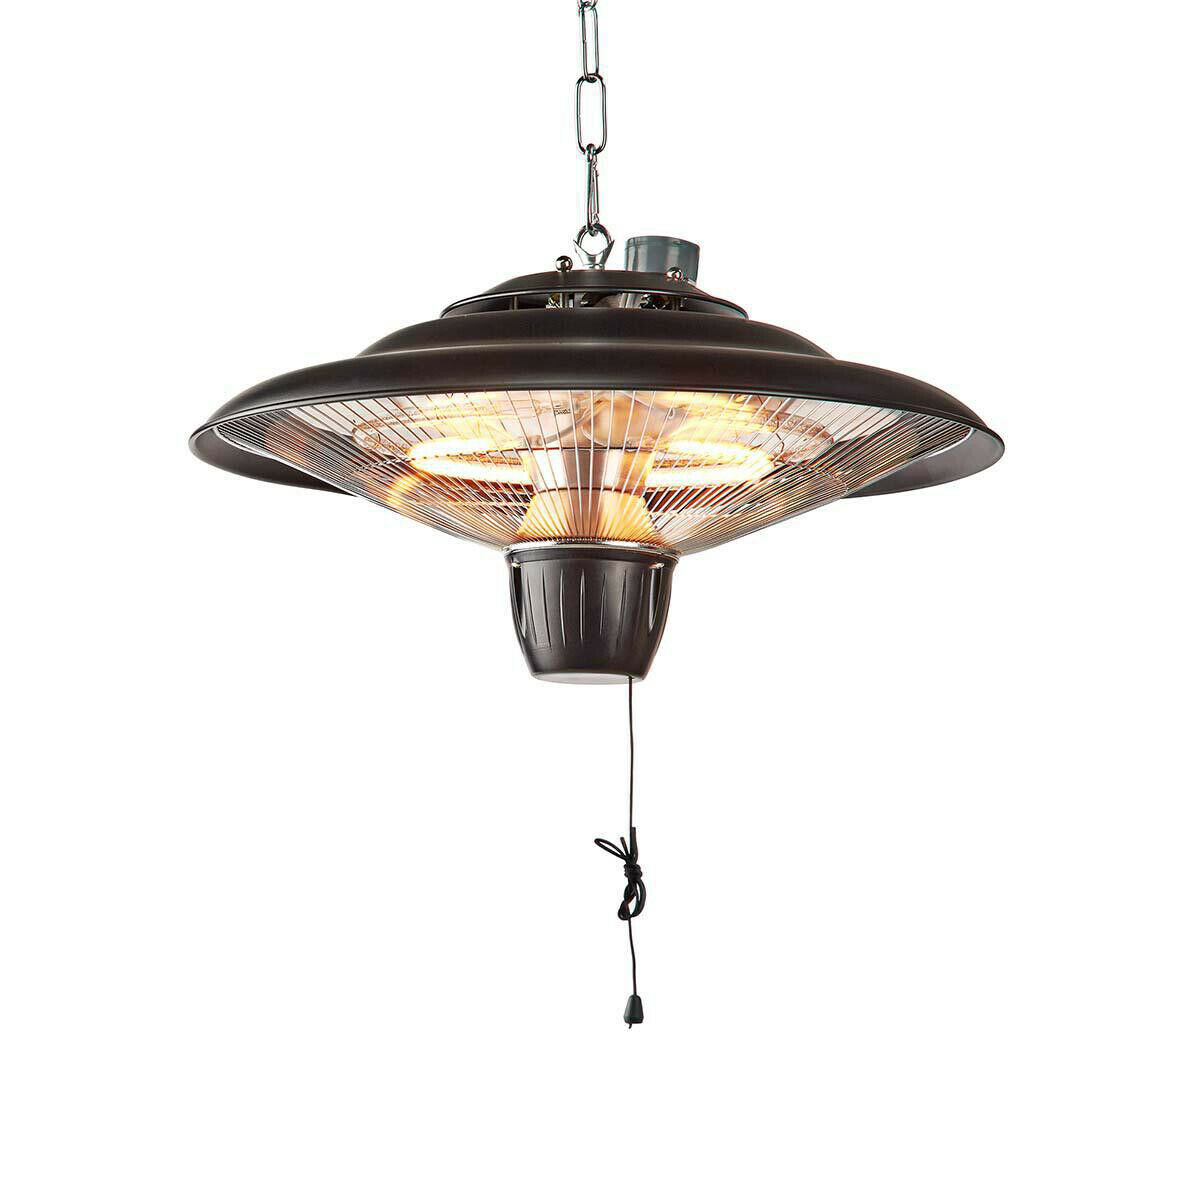 Electric Patio Heater Aluminium 2kw Ceiling Mounted Halogen Outdoor Ip24 Black with regard to proportions 1200 X 1200